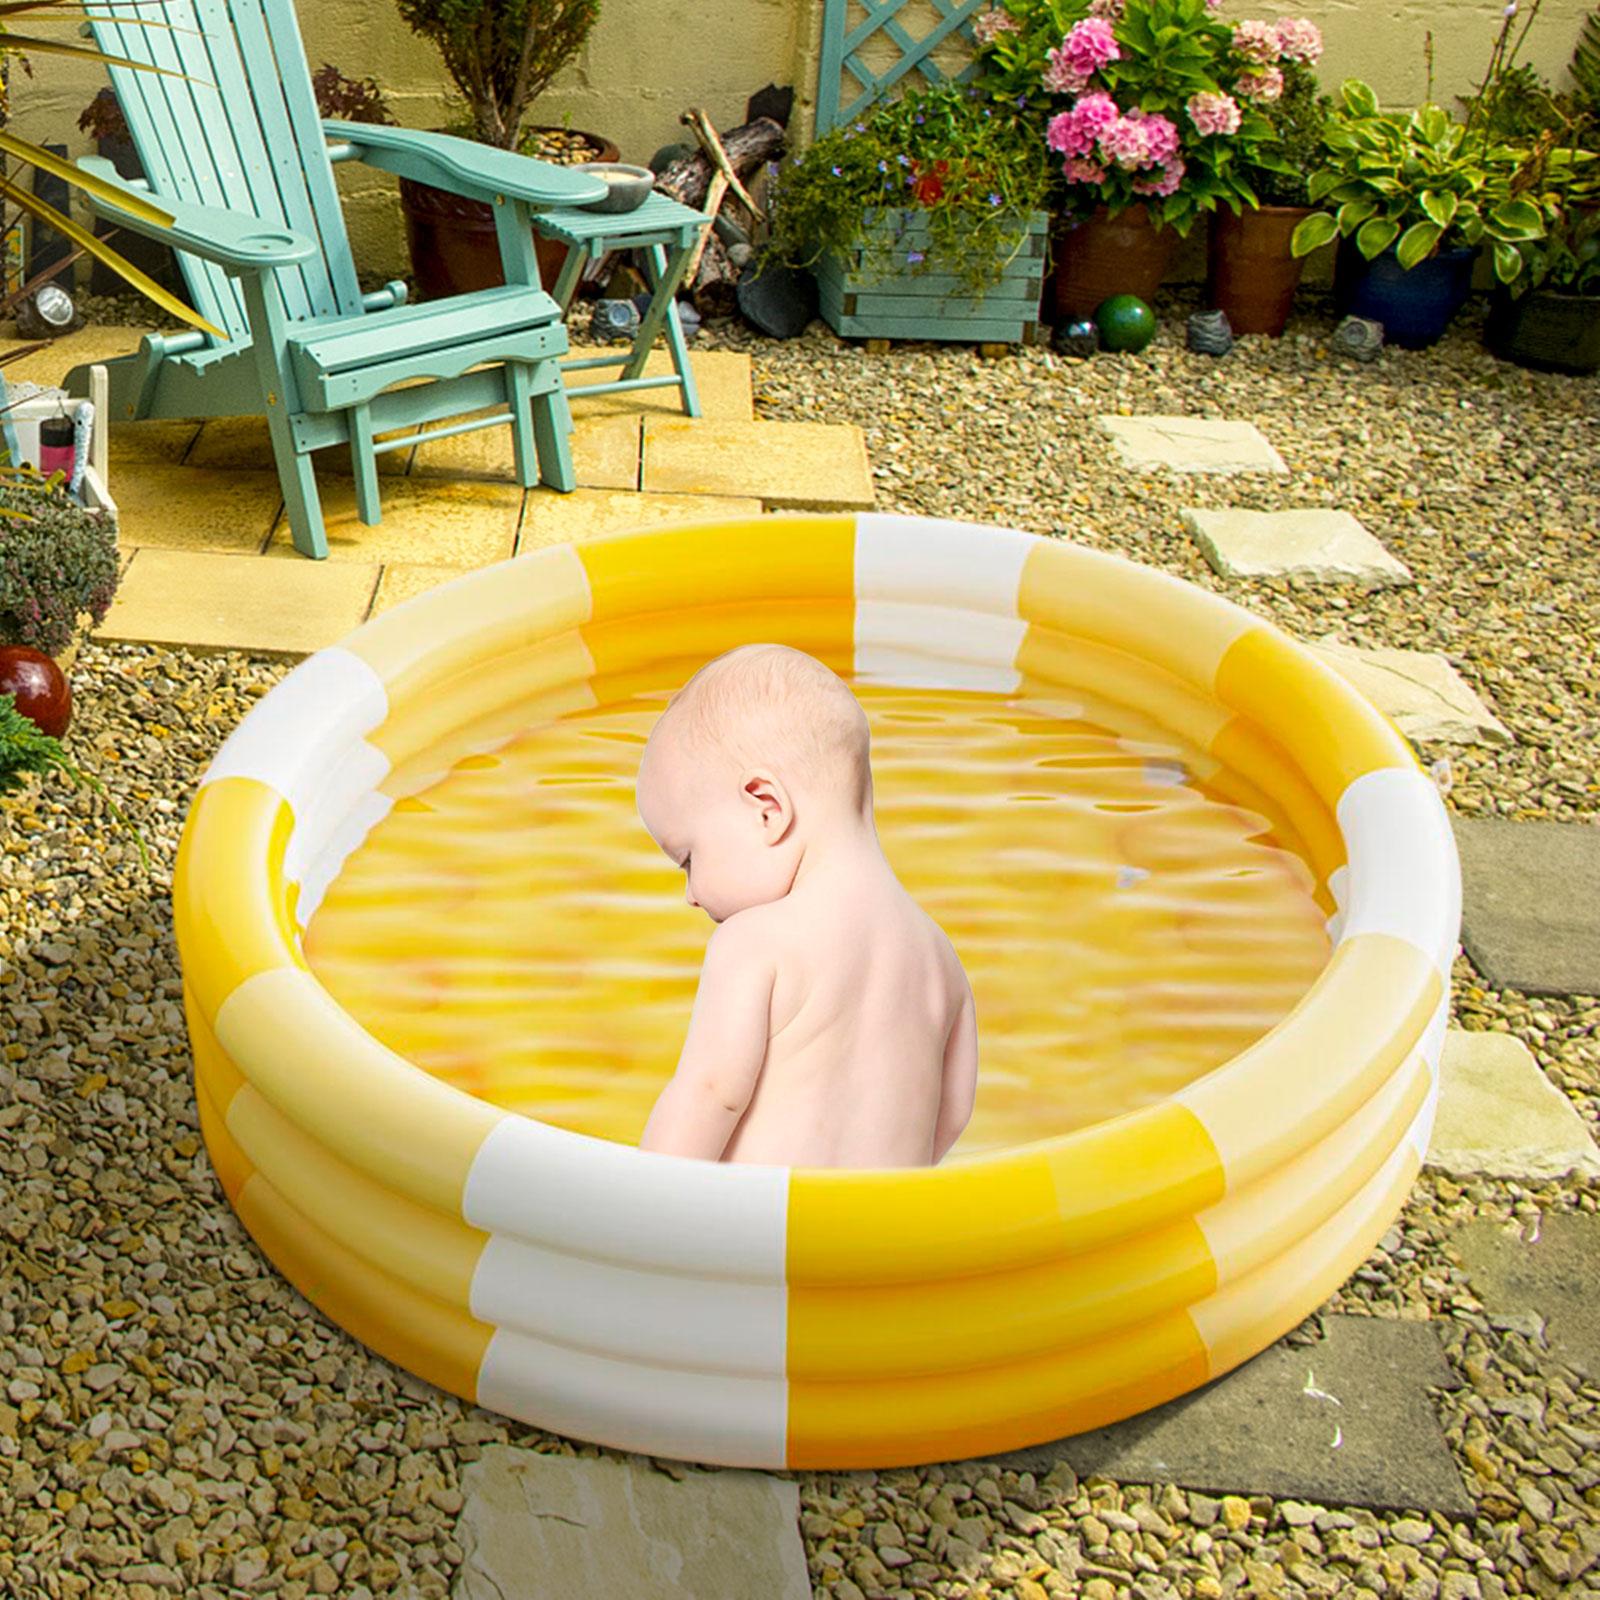 Inflatable Baby of Swimming Pool Portable for Children Toys Kids Girls and Boys Yellow 61cm